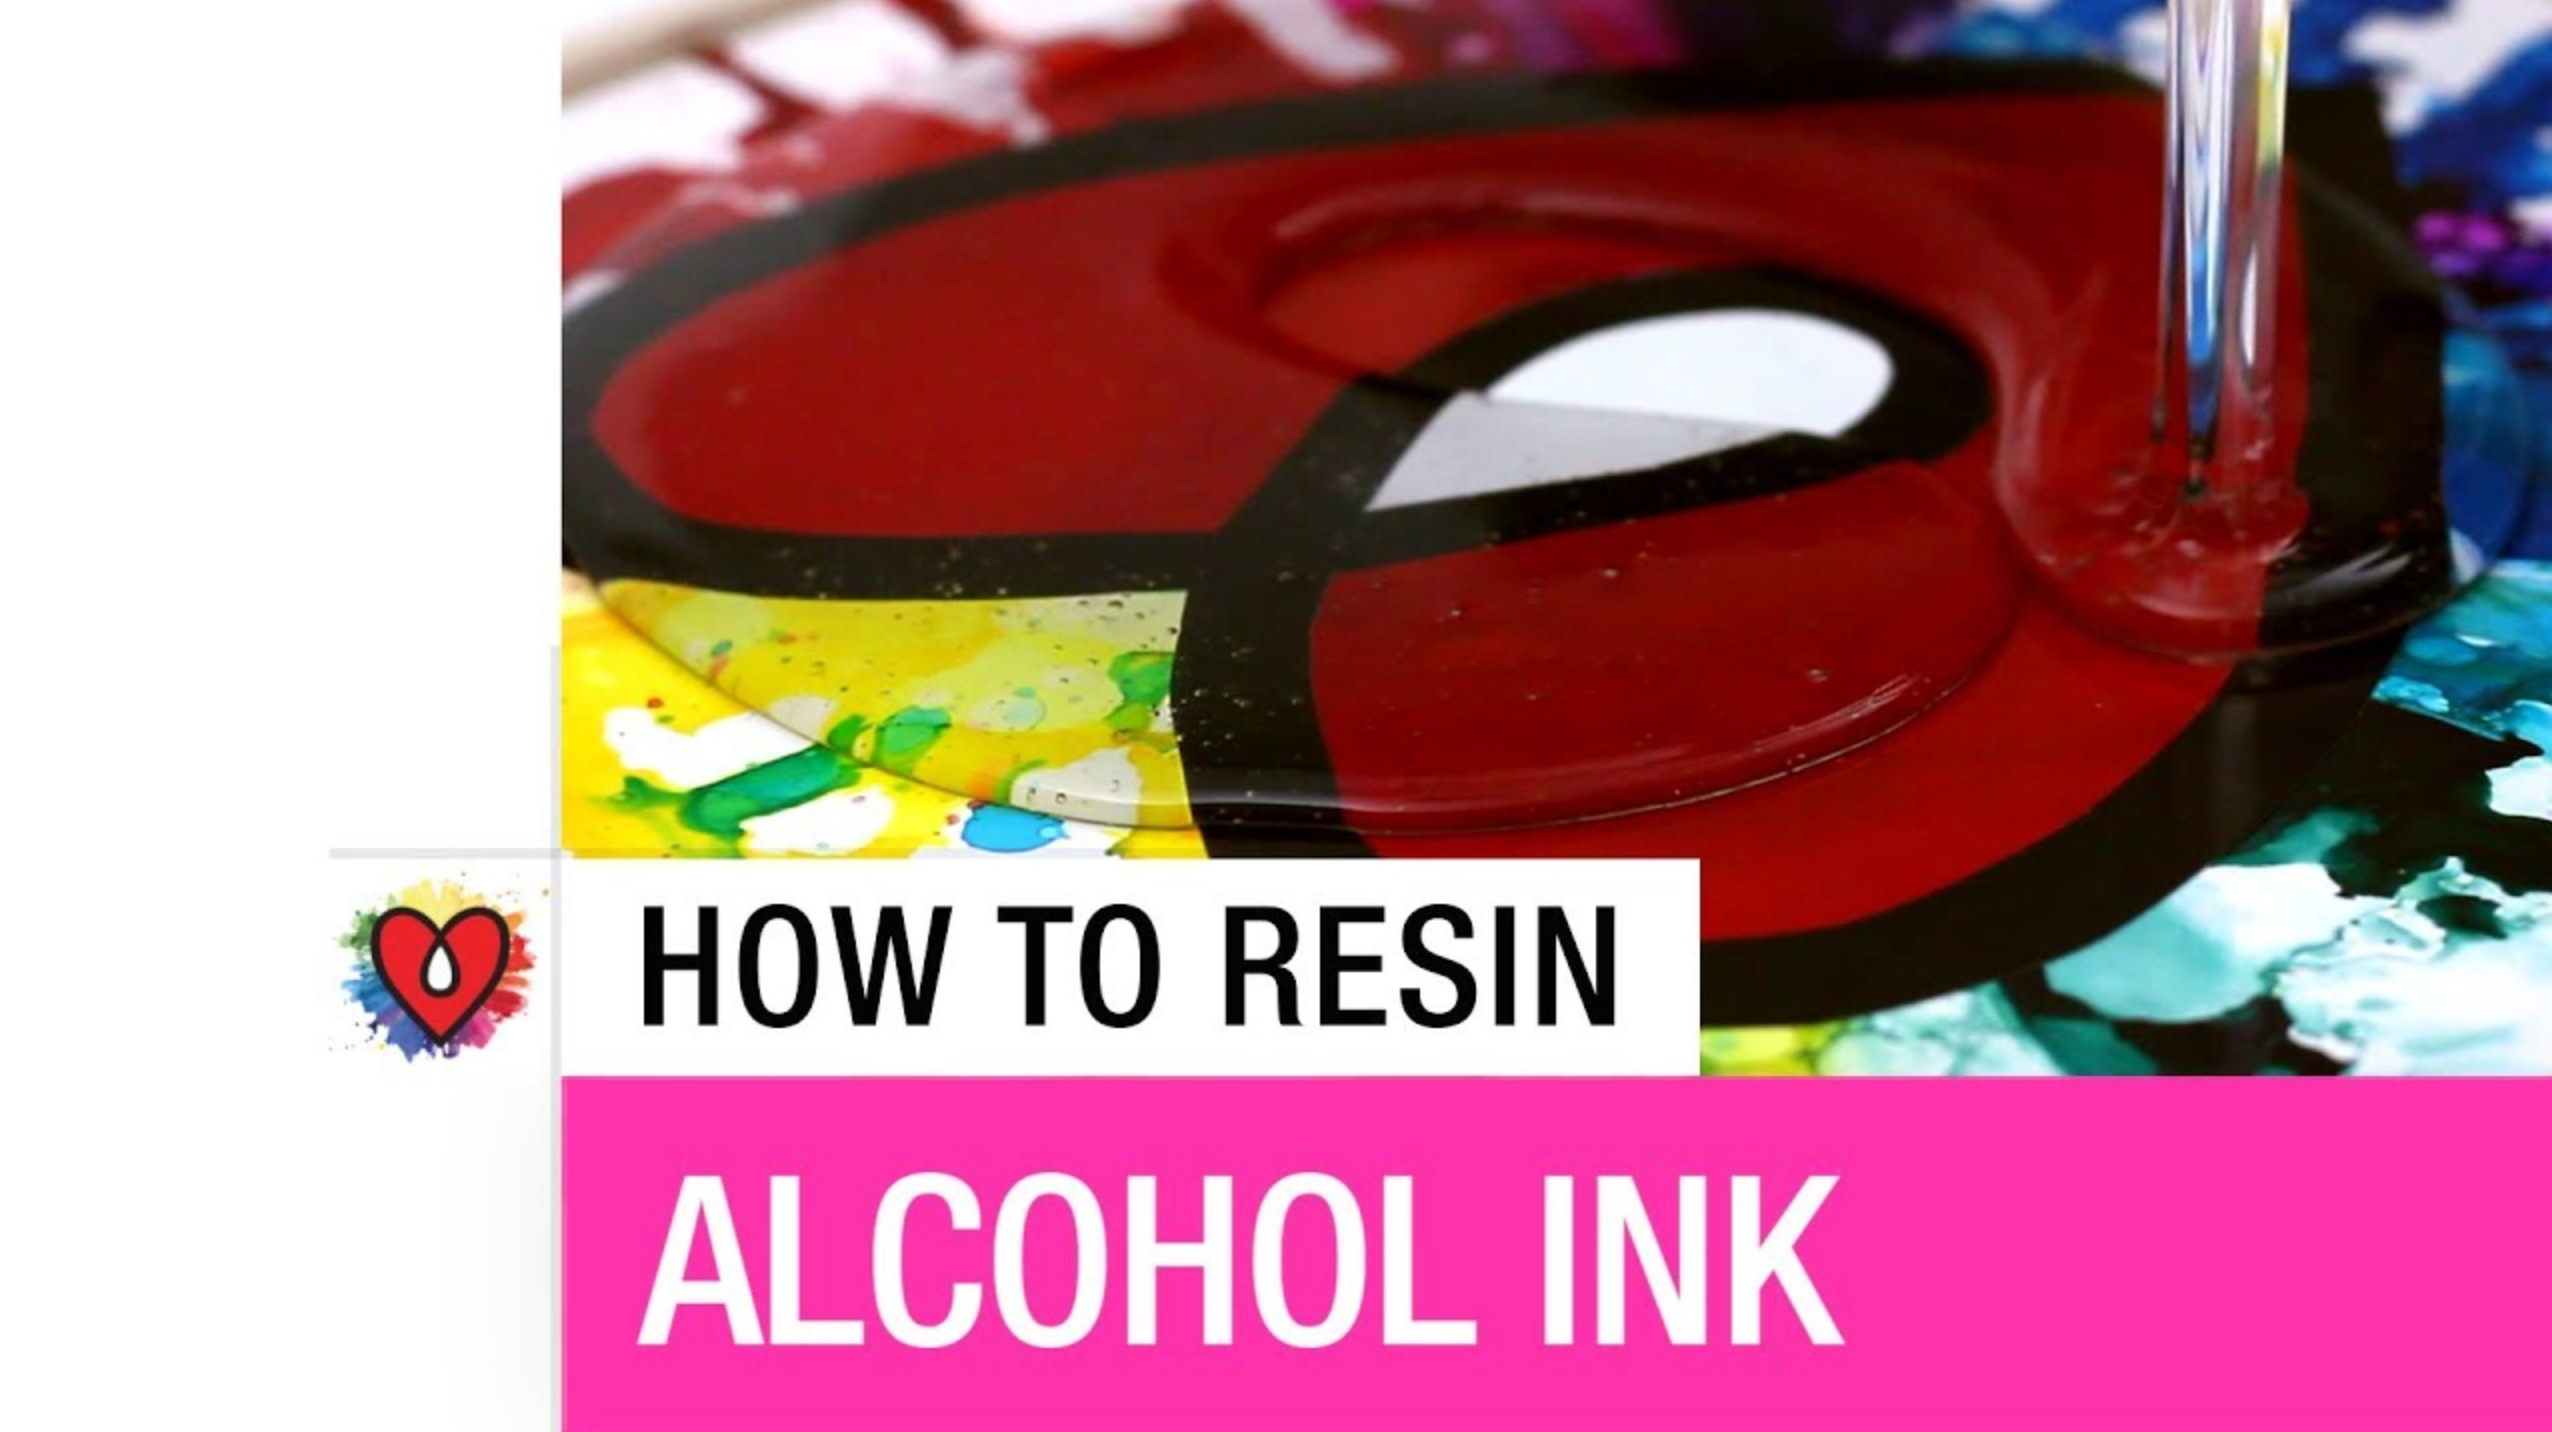 ArtResin Alcohol Ink –